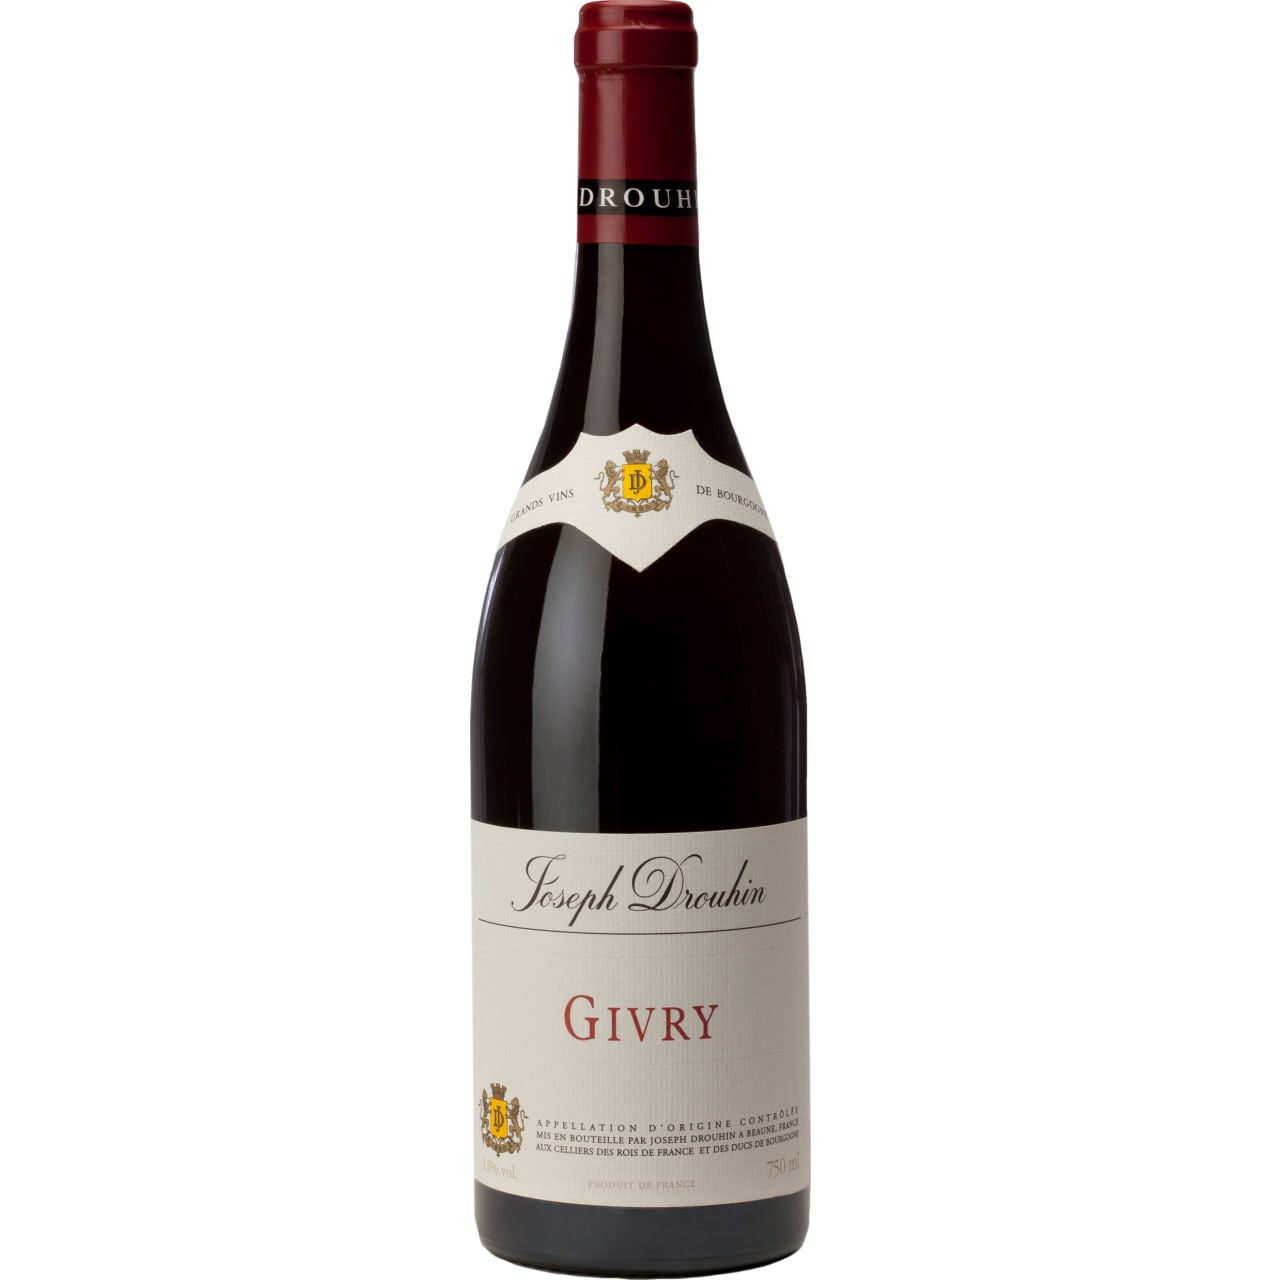 A round and captiviating wine, appreciated by all wine connoisseurs. With its lively and bright colour, it has intense fruity aromas reminiscent of gooseberry and black currant.